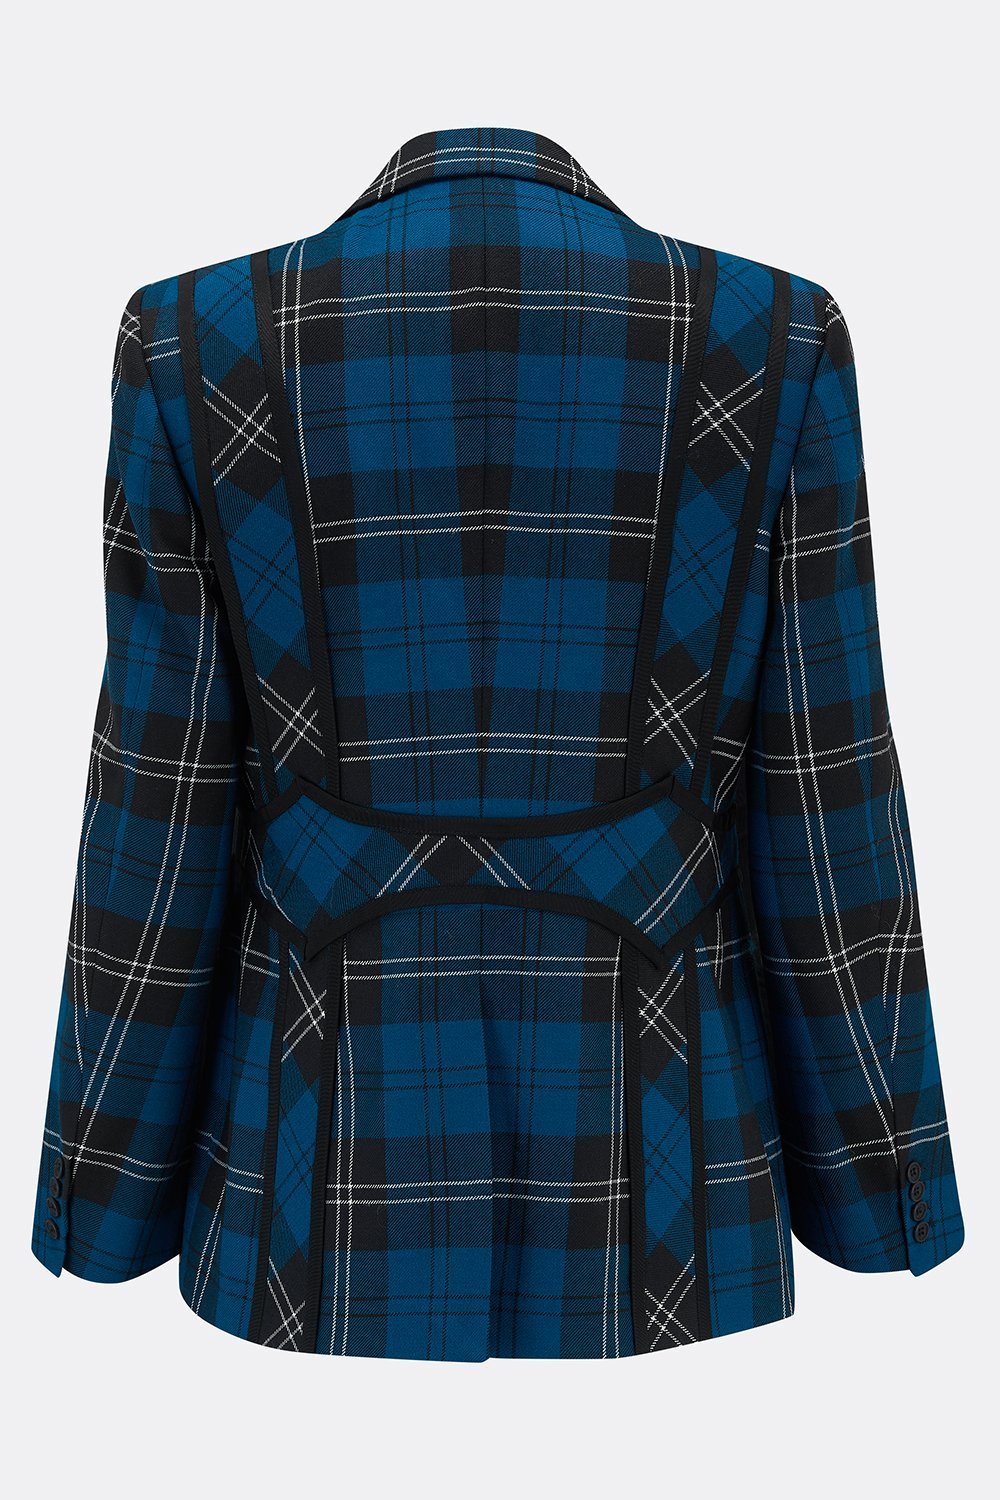 AITCH JACKET IN BLUE CHECK (made to order)-menswear-A Child Of The Jago